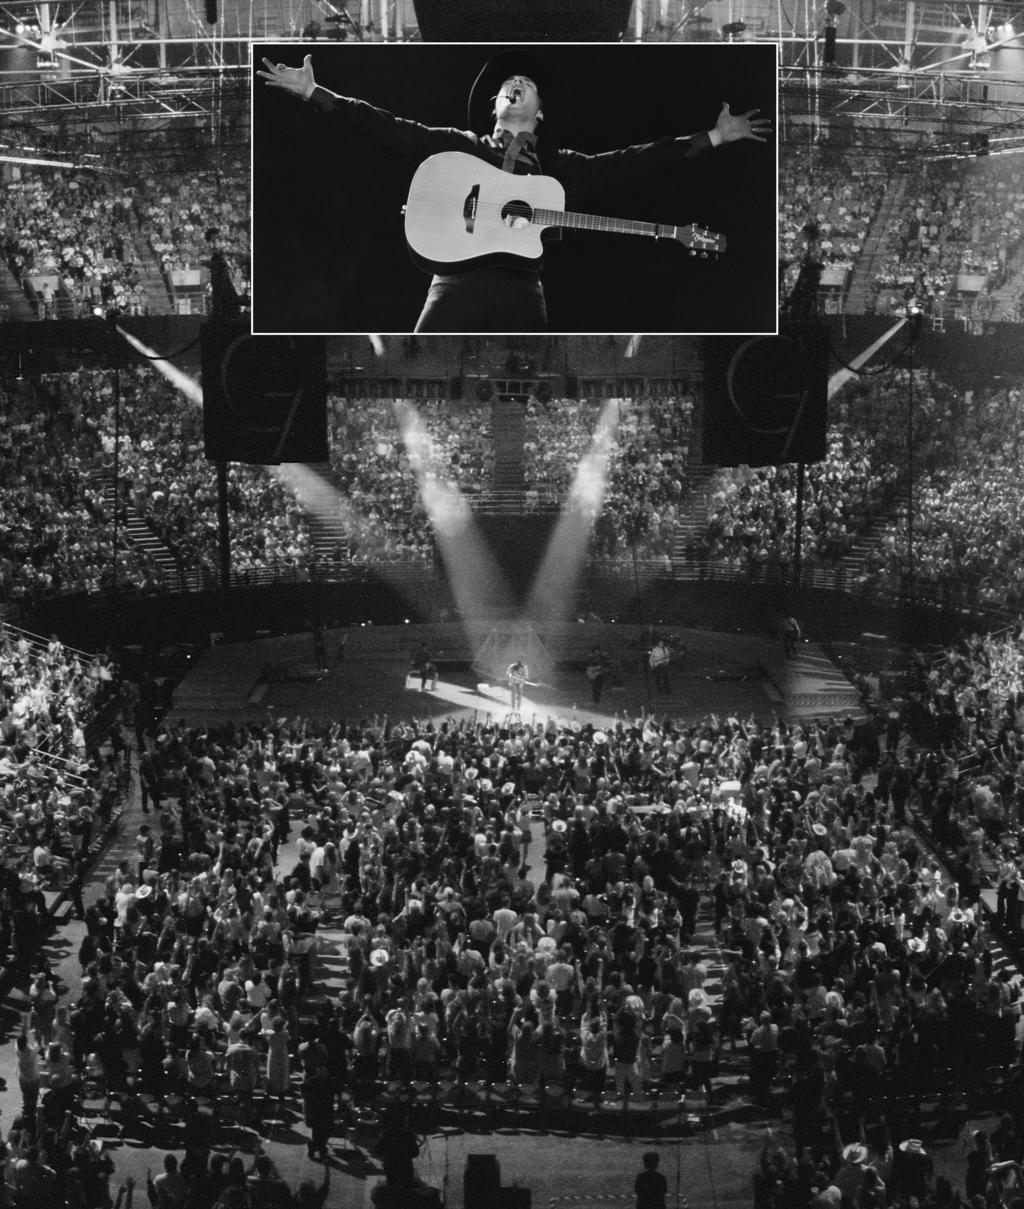 Garth Brooks strung together a series of 13 sellouts in Las Vegas